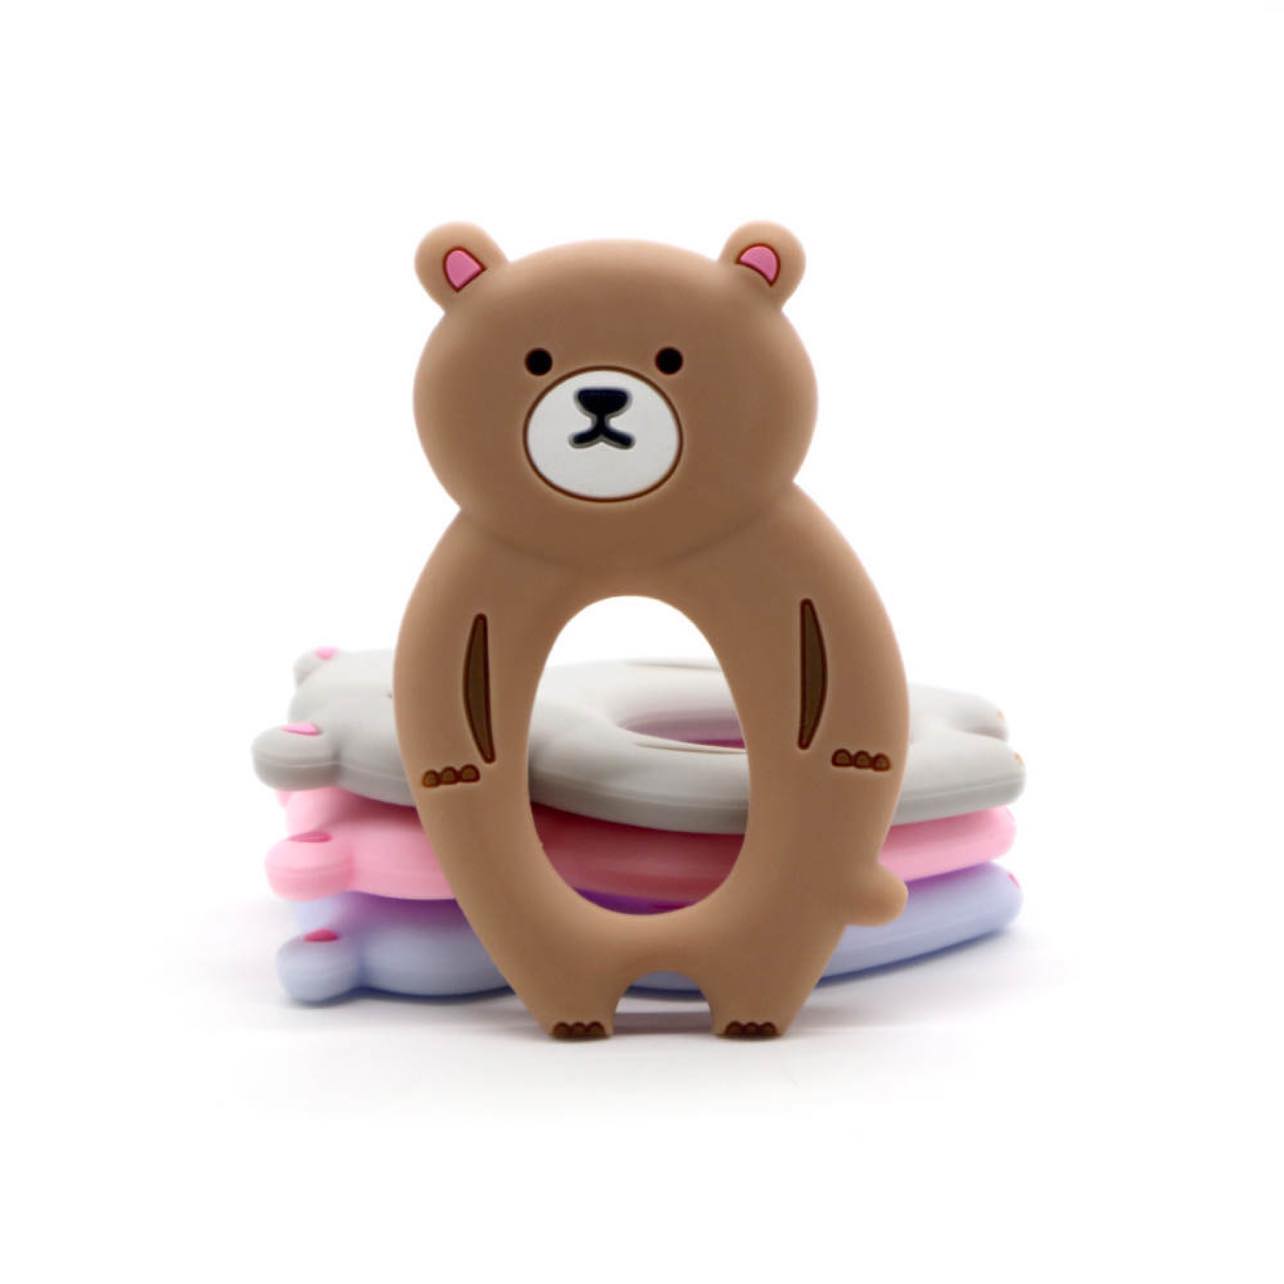 Introduce your baby to the Teddy Bear 👶 Silicone Teething Ring! This  super soft ❤️ silicone teething ring is perfect for relieving the discomfort of their 🦷 gums